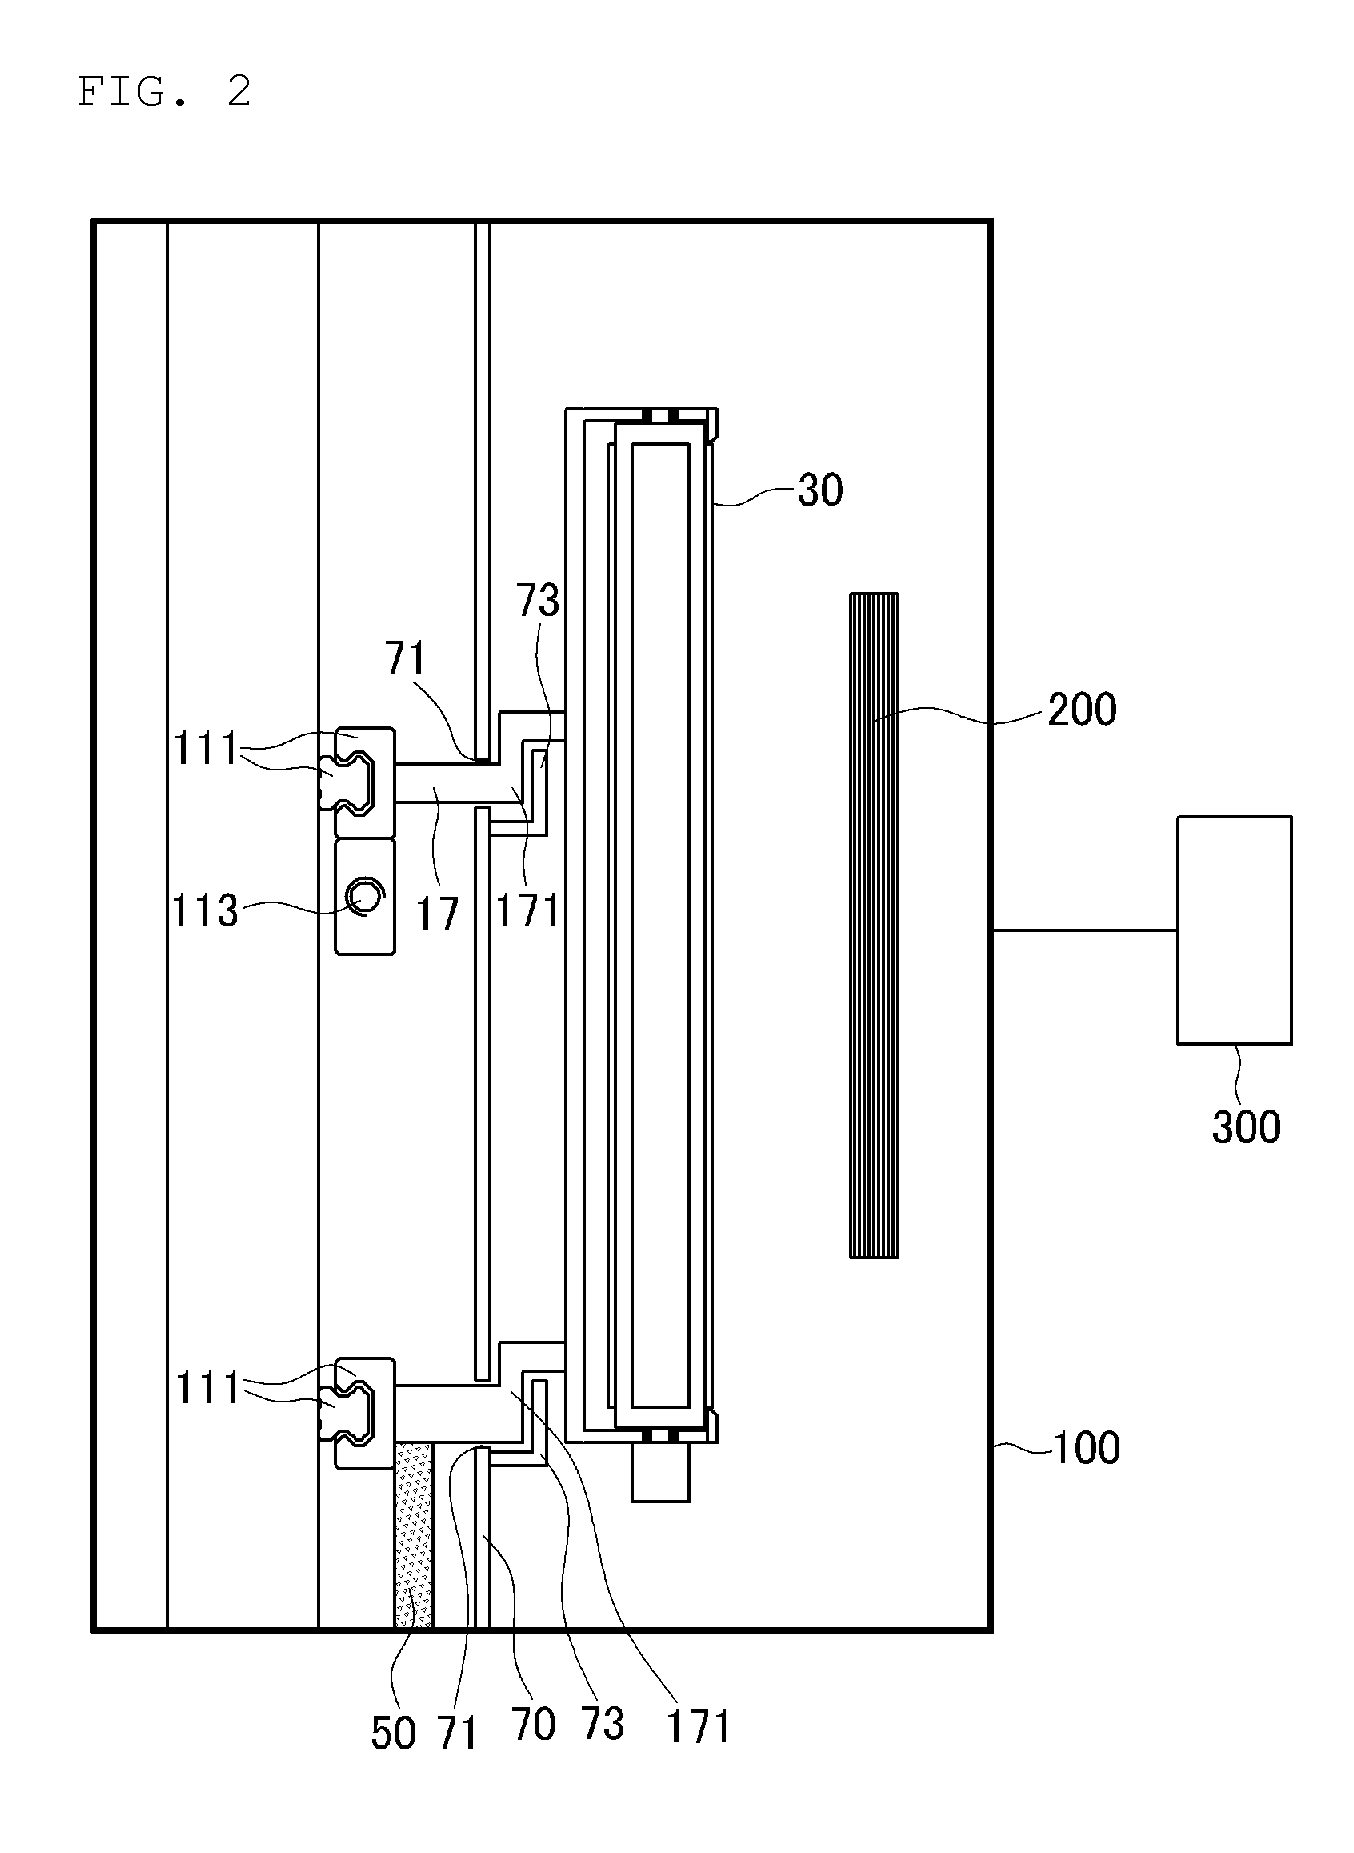 Deposition apparatus containing moving deposition source